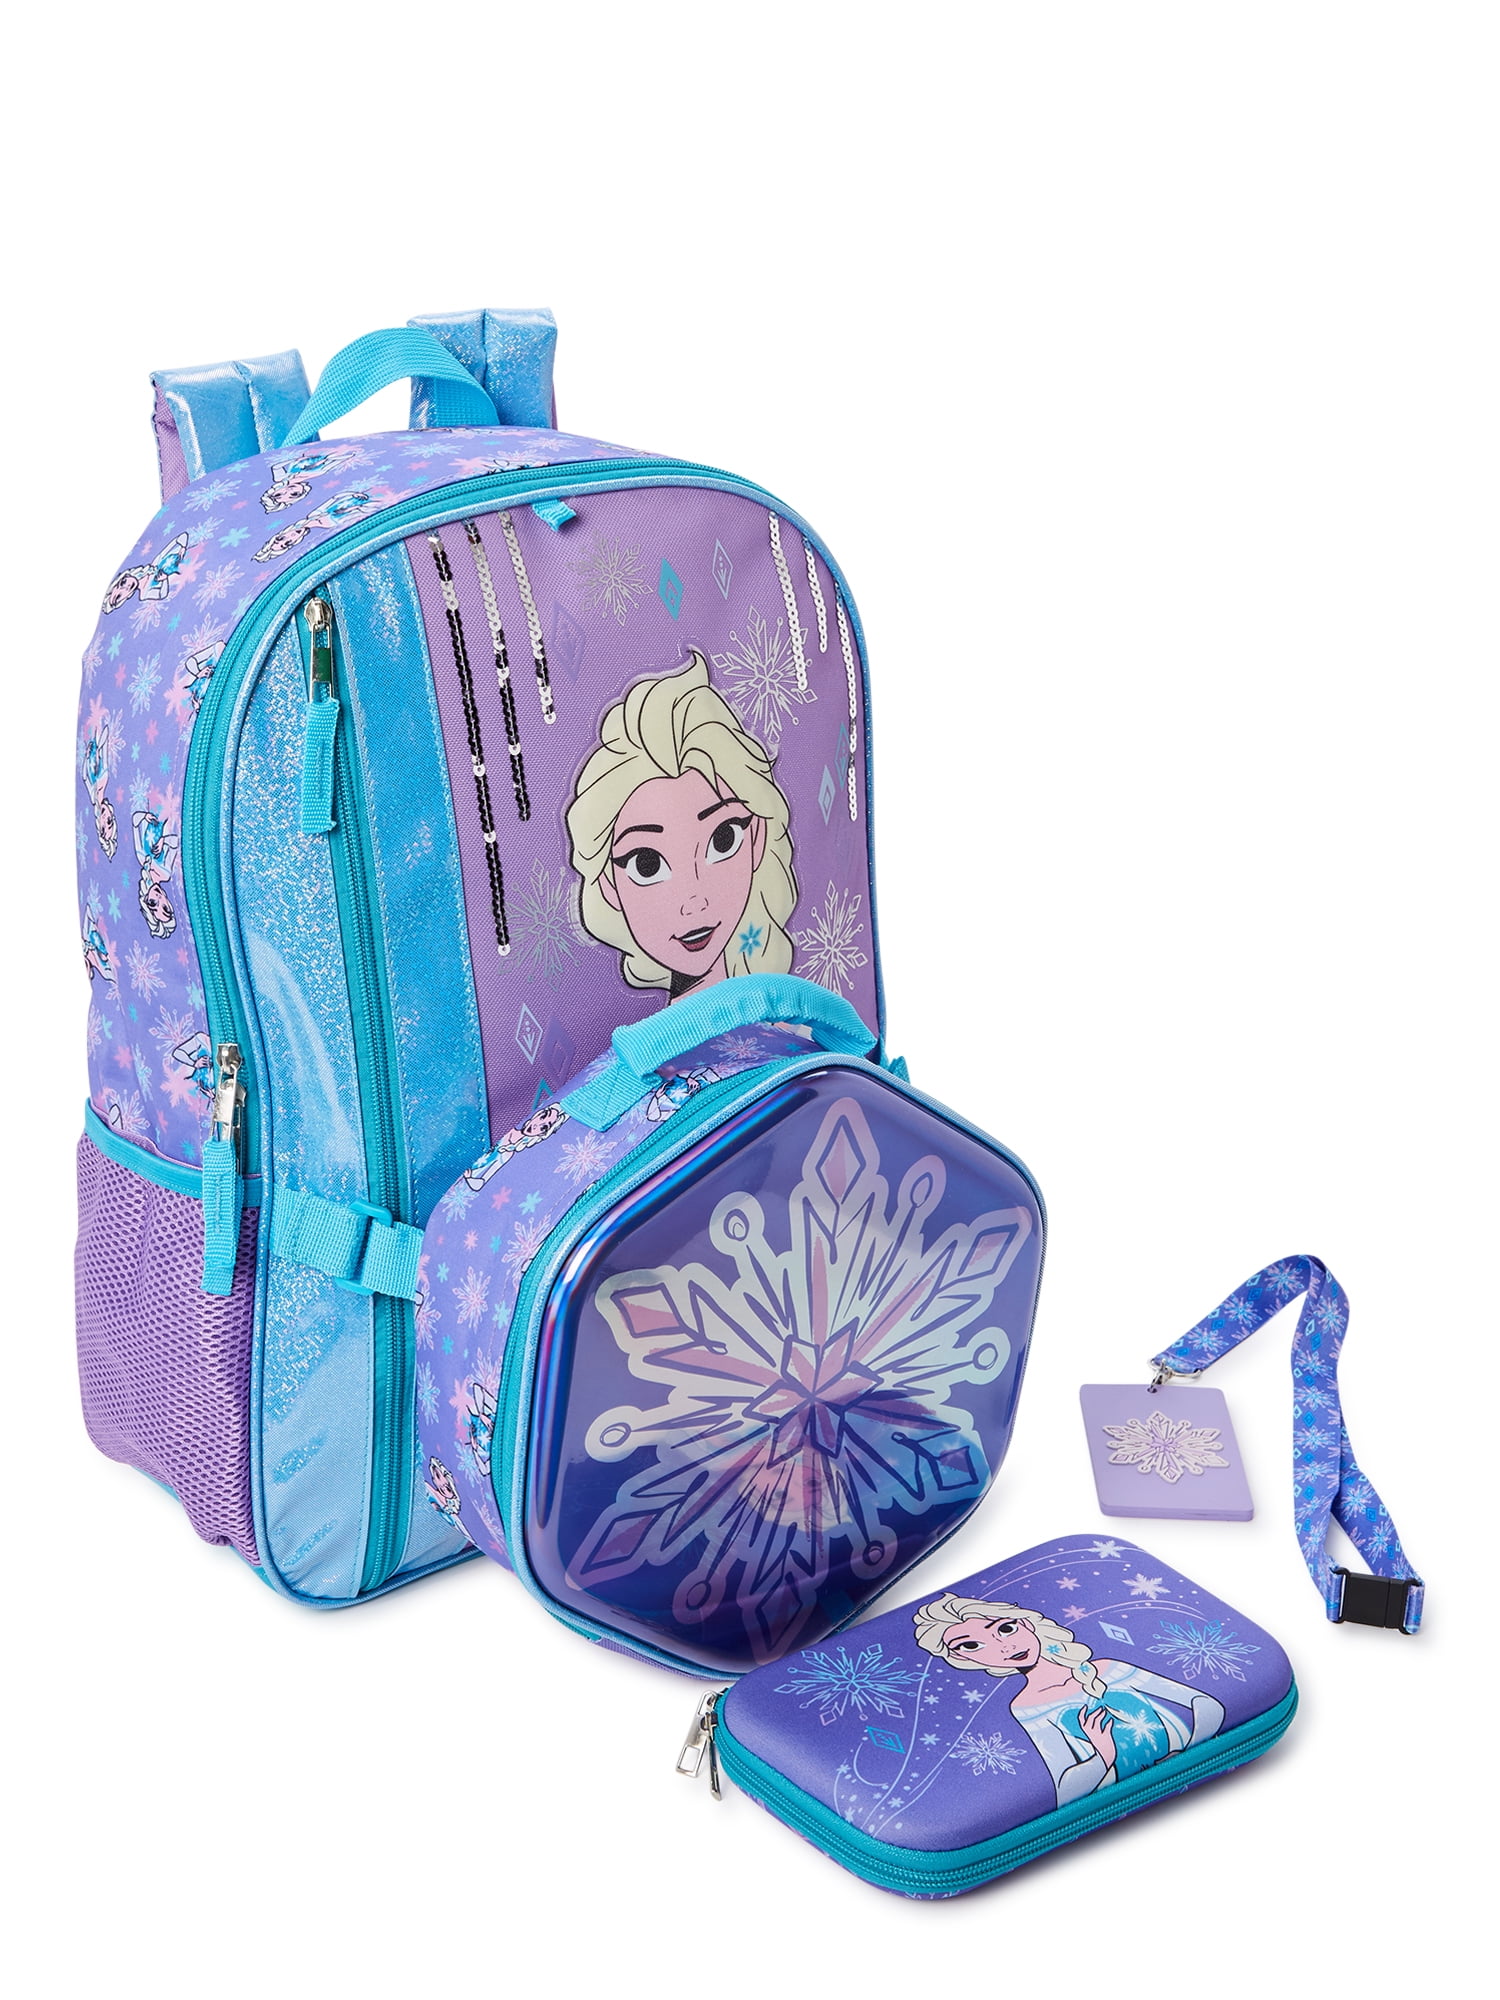 New Disney's Frozen Elsa Backpack with Clear Pocket Lunchbox Bag 16in Backpack 